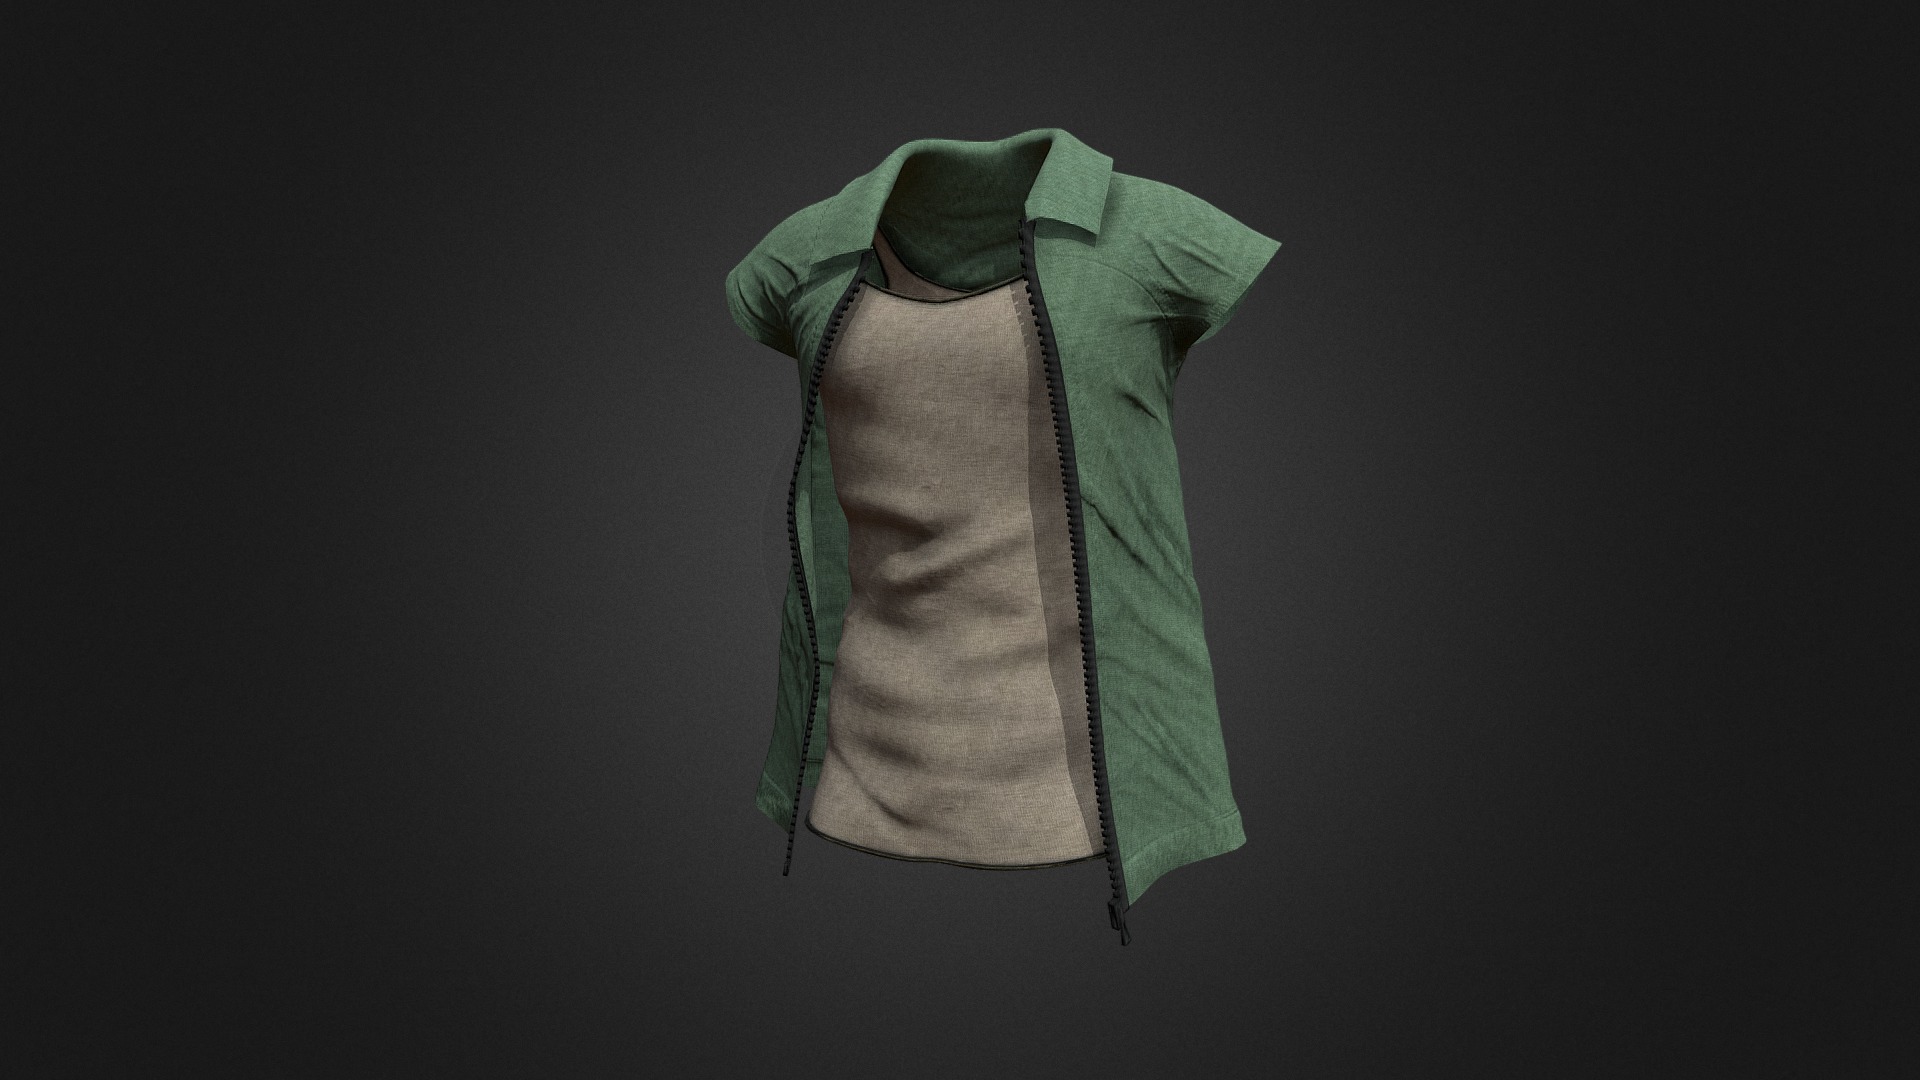 3D model Clothing Set 3 - This is a 3D model of the Clothing Set 3. The 3D model is about a green and white shirt.